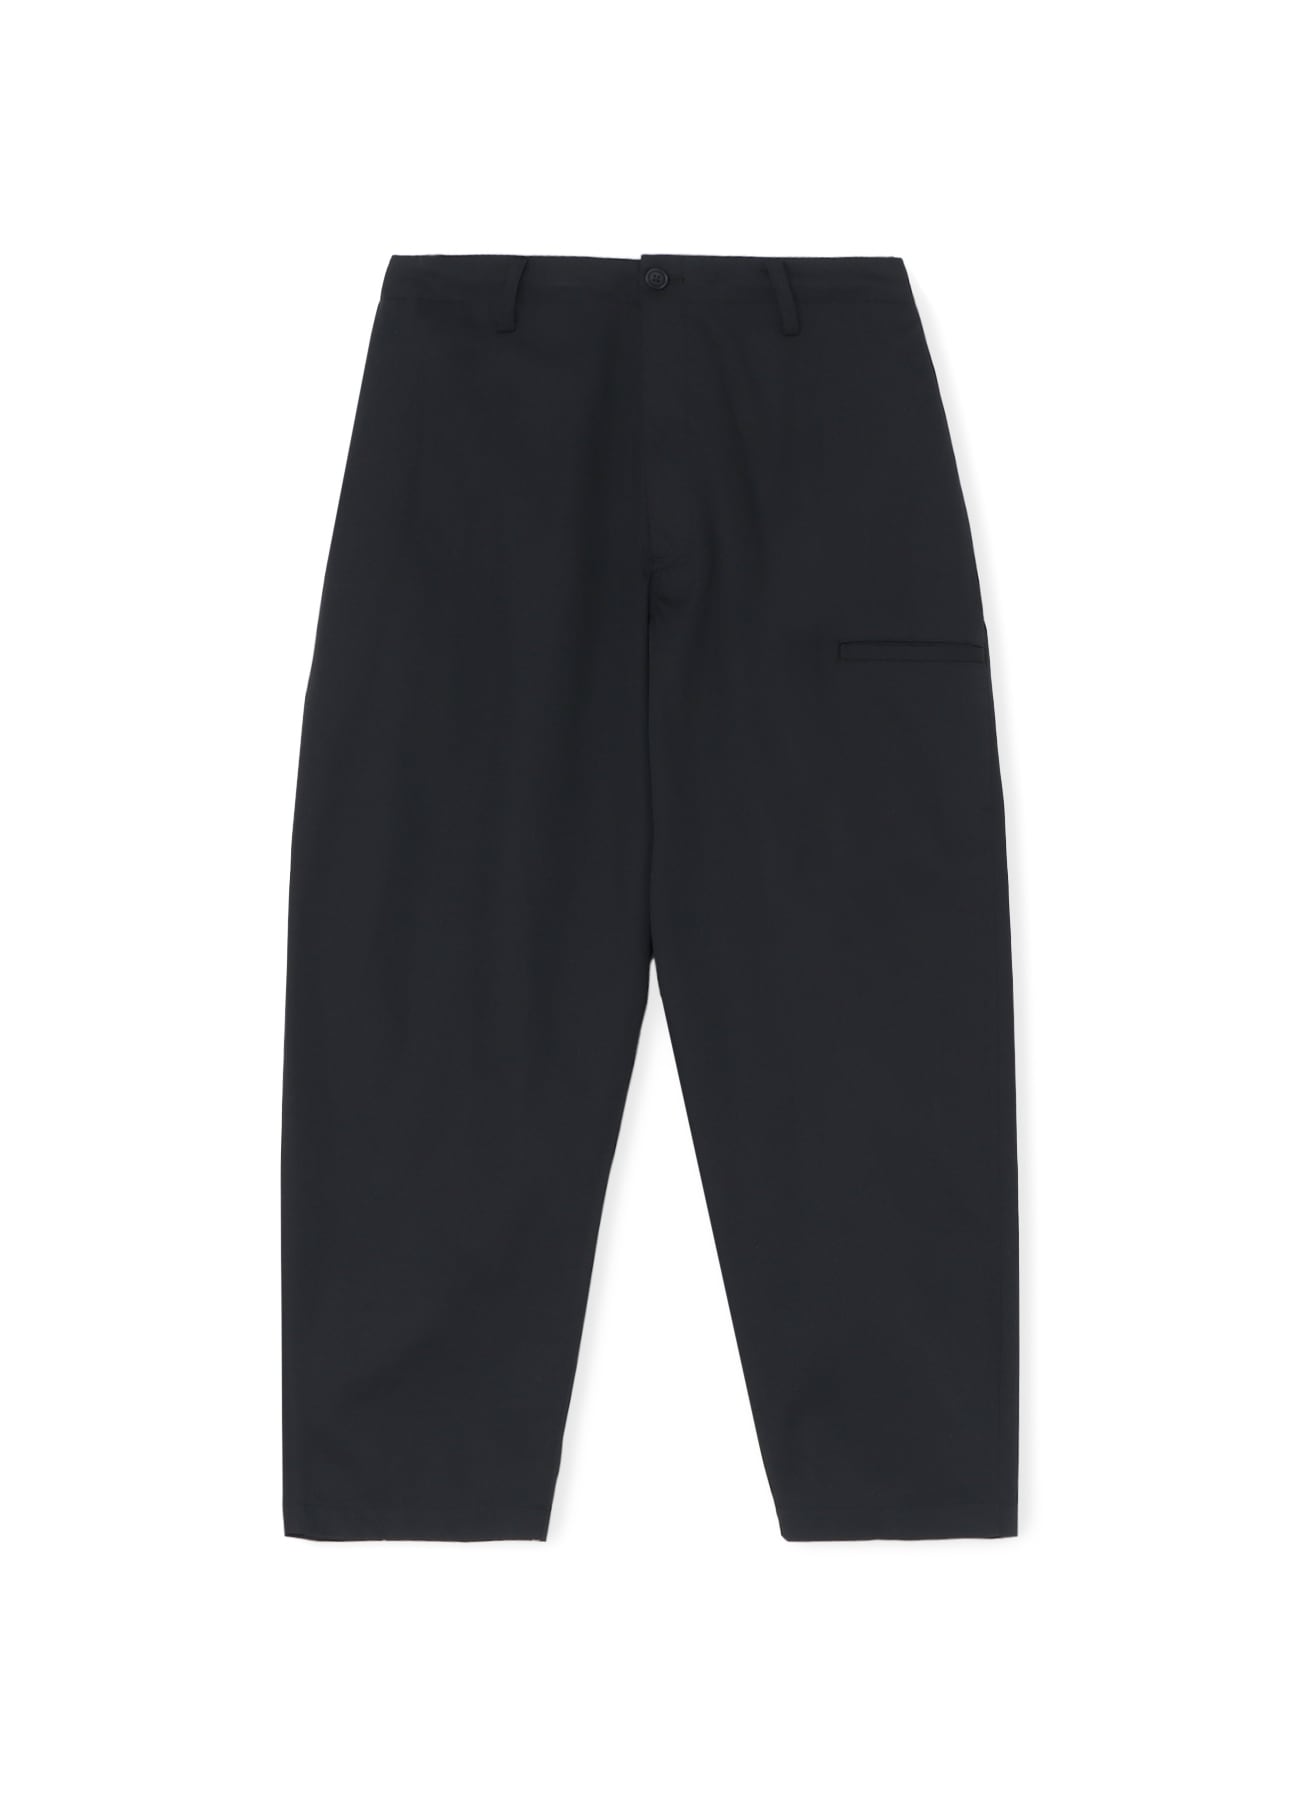 POLYESTER/COTTON TWILL PANTS WITH SIDE POCKET